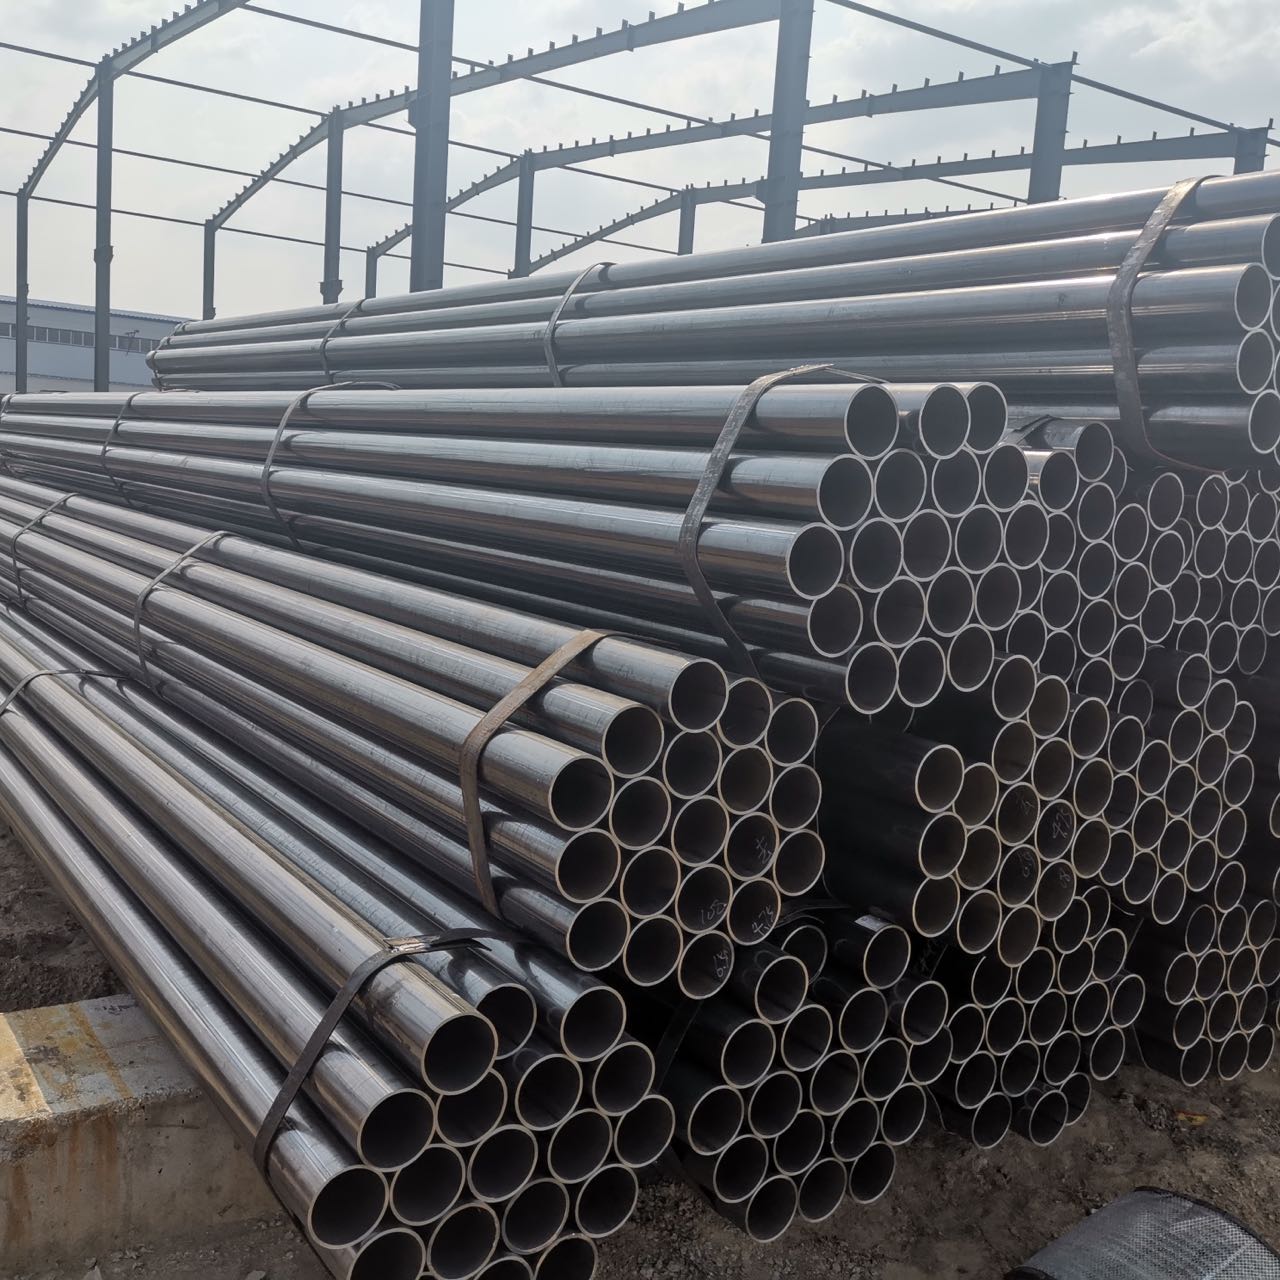 Comparison of painting methods for carbon steel pipes